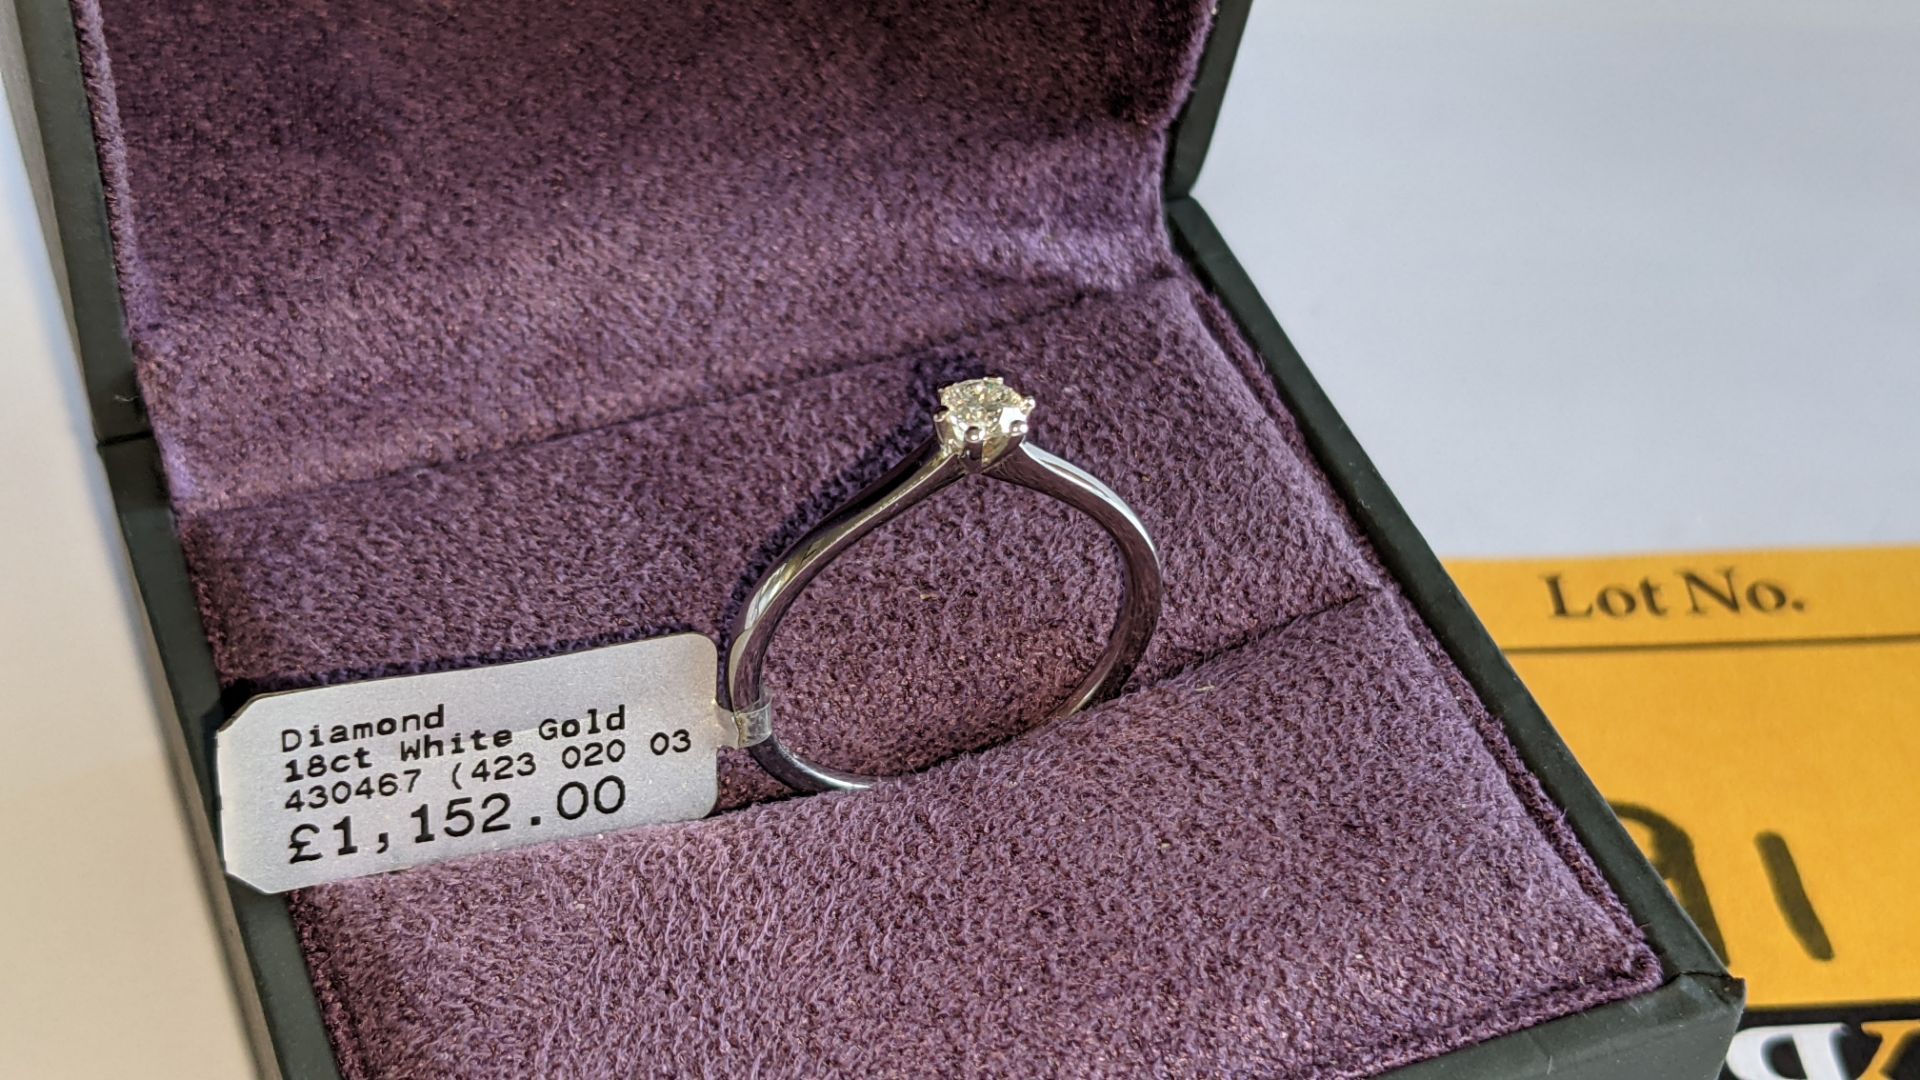 18ct white gold & diamond ring with 0.20ct G/Si brilliant cut diamond RRP £1,152 - Image 17 of 17